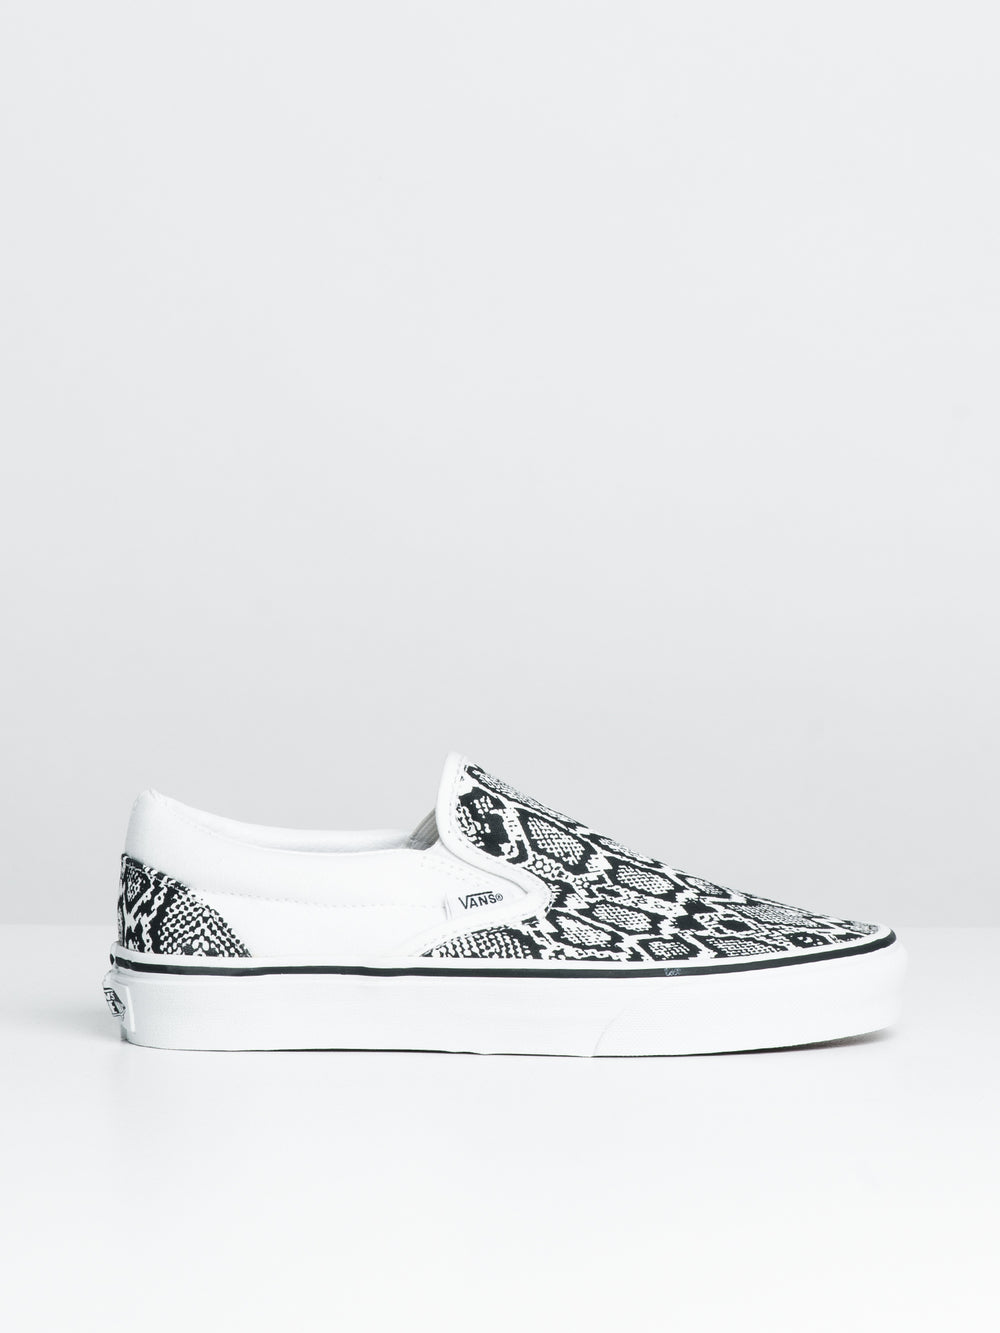 WOMENS CLASSIC SLIP ON - PYTHON WHITE - CLEARANCE